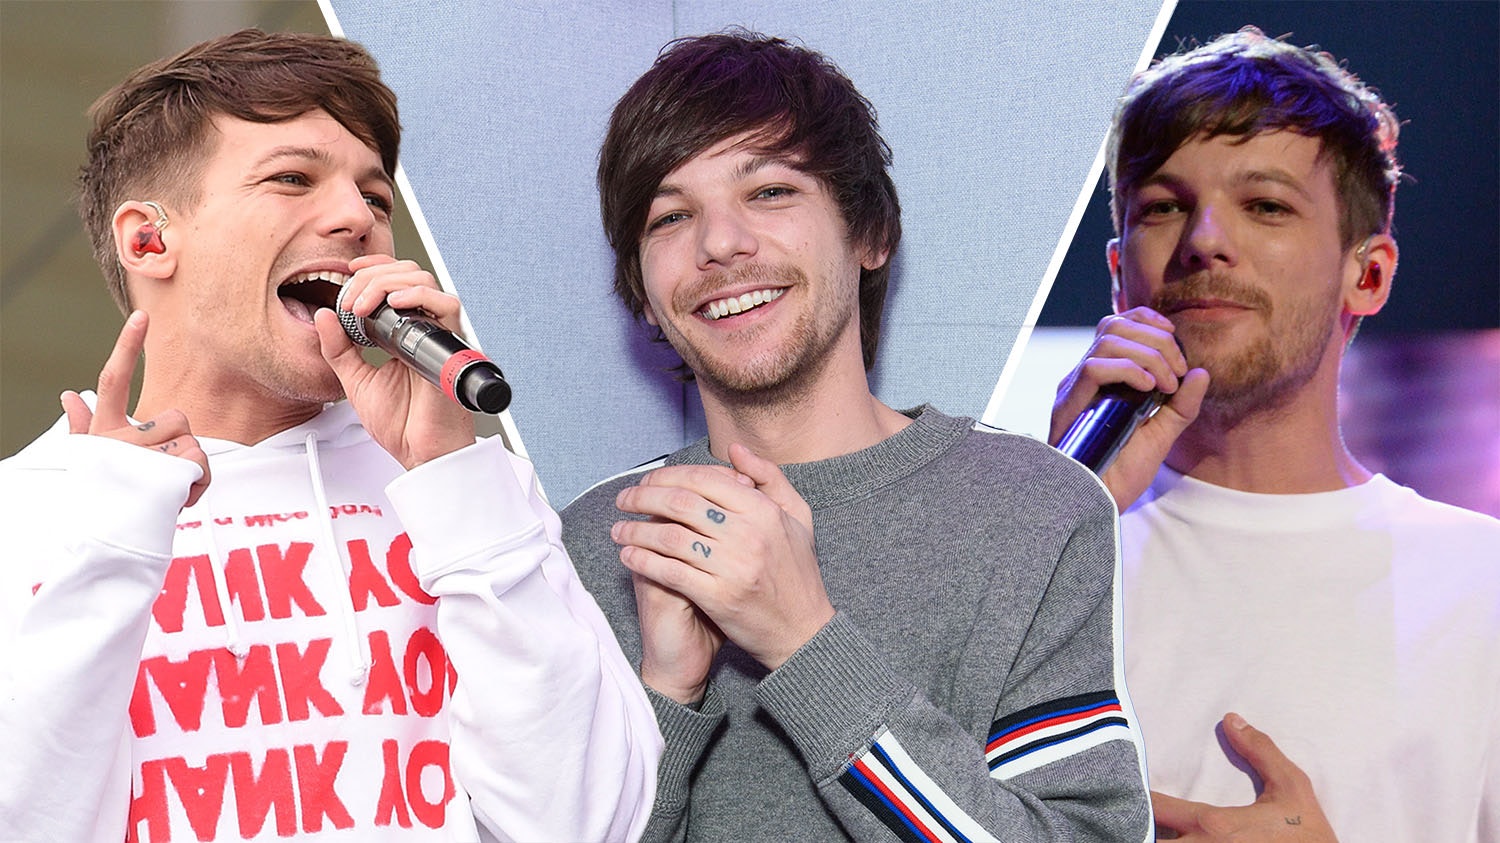 Louis Tomlinson - Official Merch  Just launched my new store with